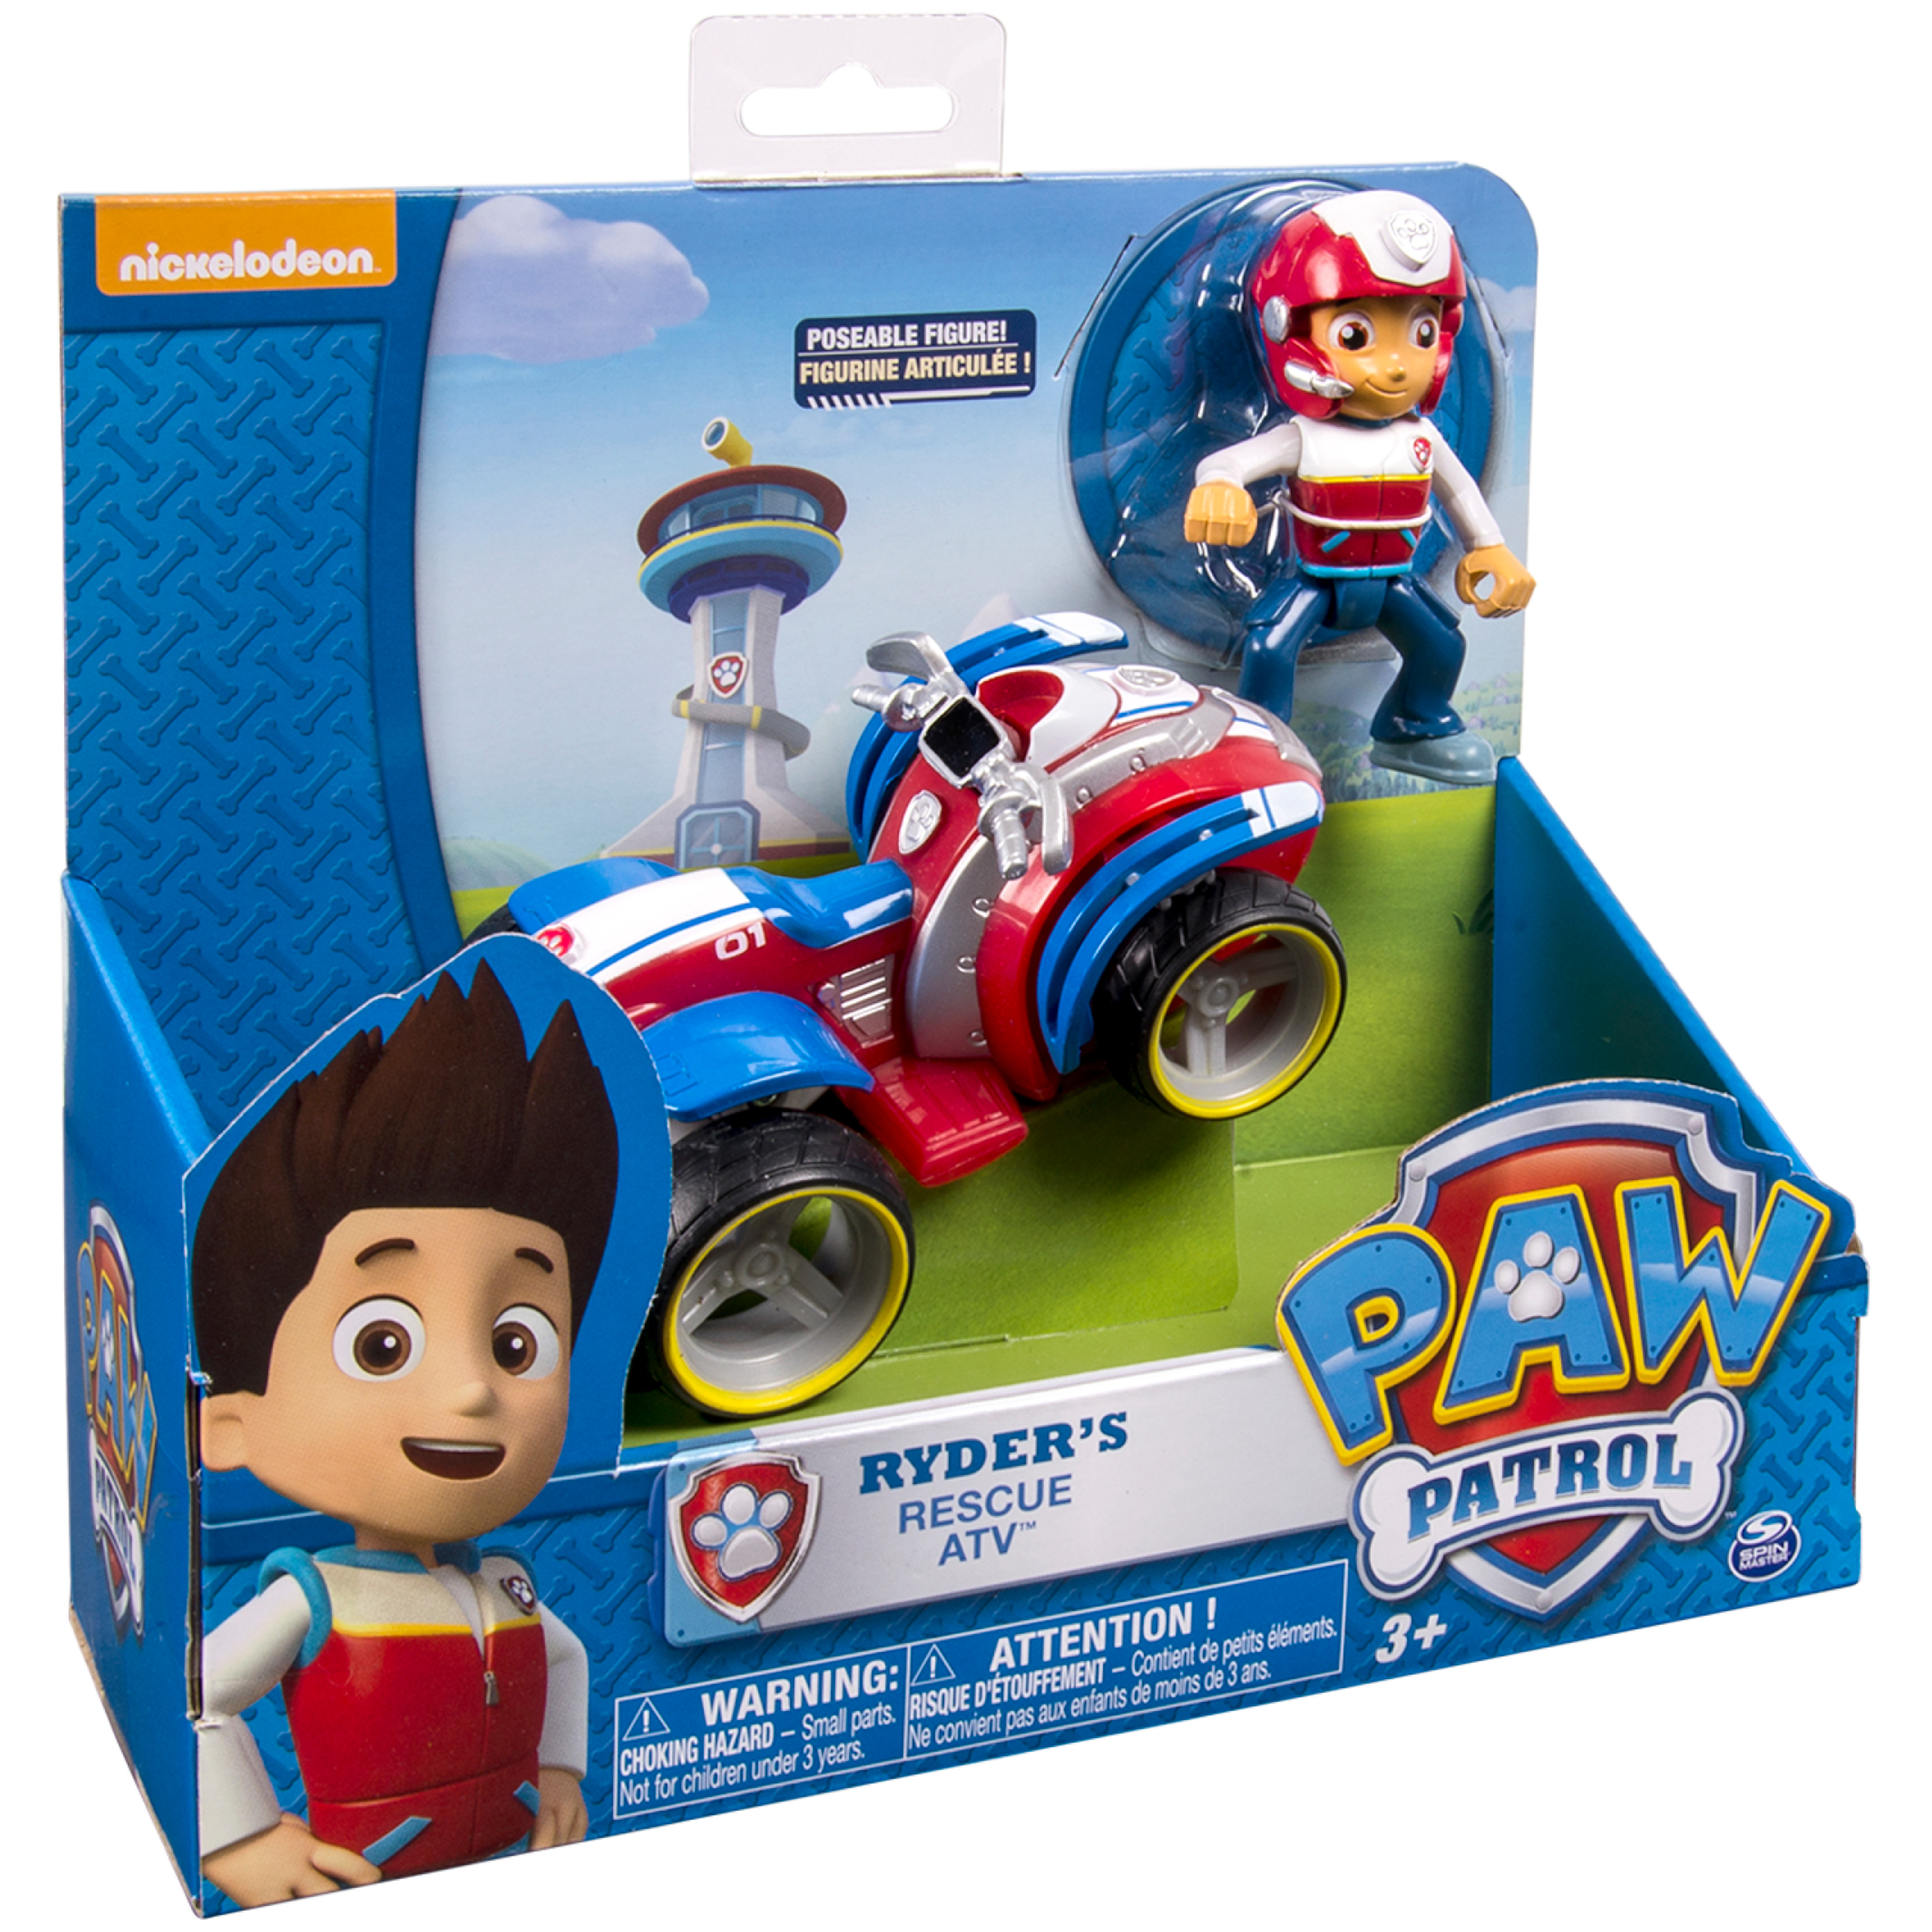 PAW Patrol Ryder's Rescue ATV, Vehicle and Figure, For Ages 3 and up - image 3 of 6